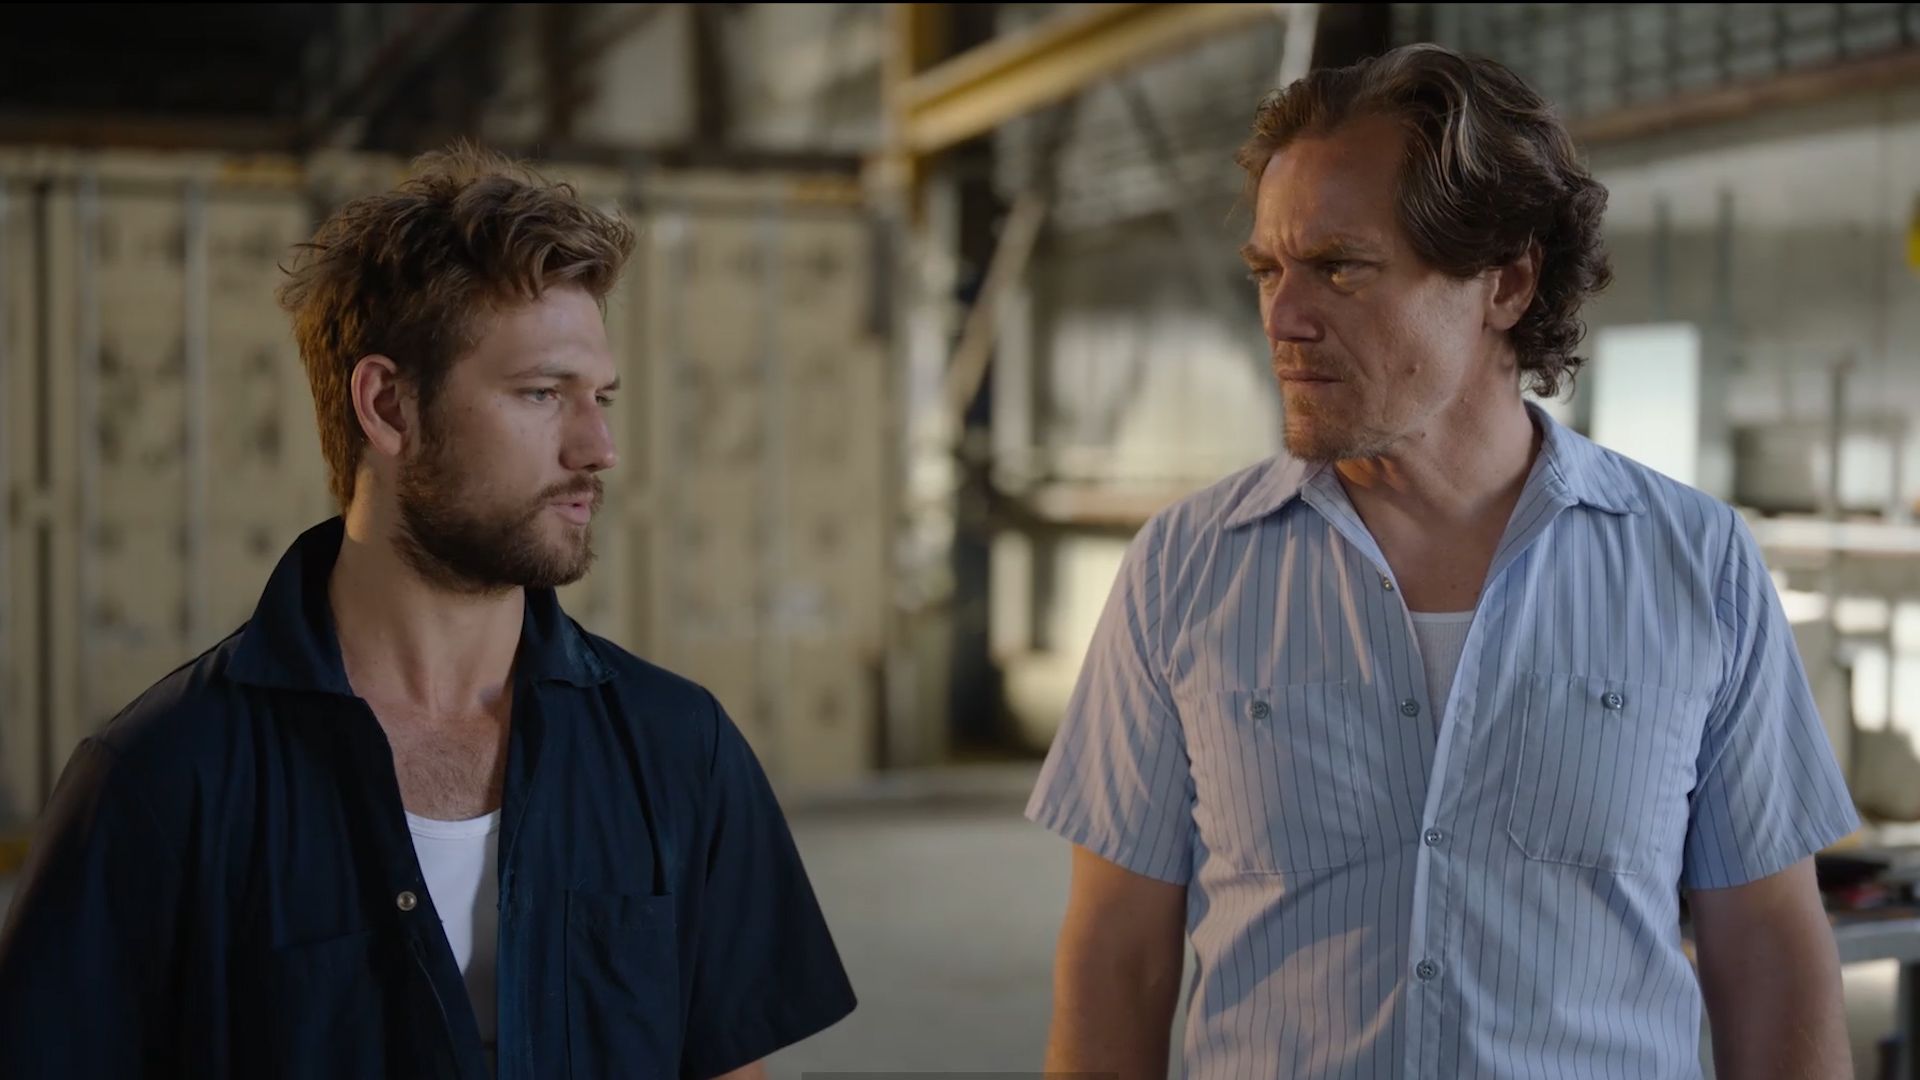 Alex Pettyfer and Michael Shannon in Echo Boomers